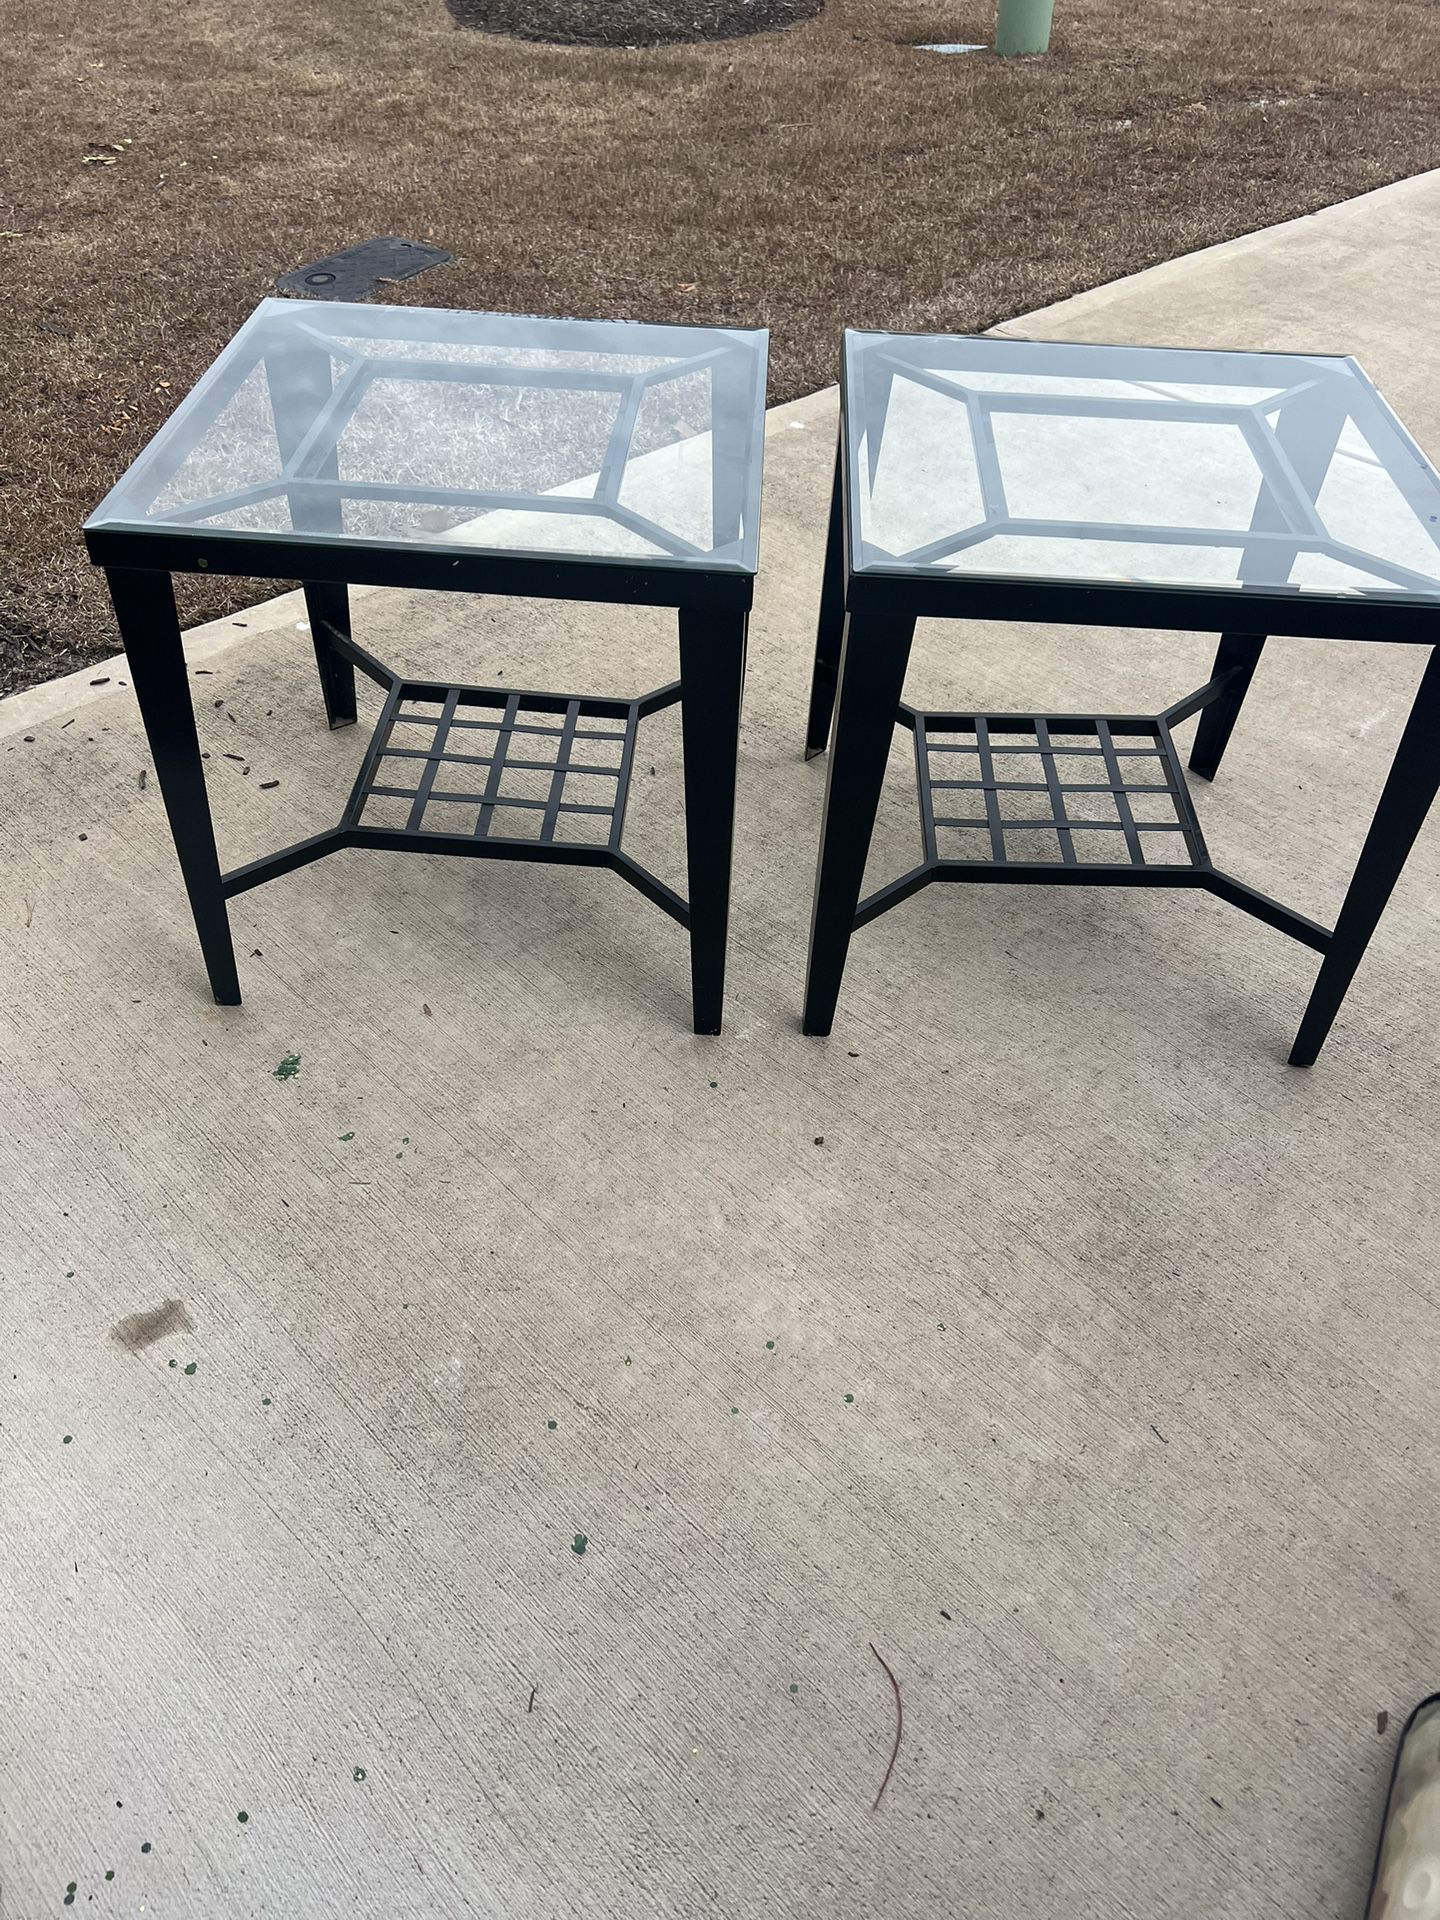 2 Wrought Iron End Tables